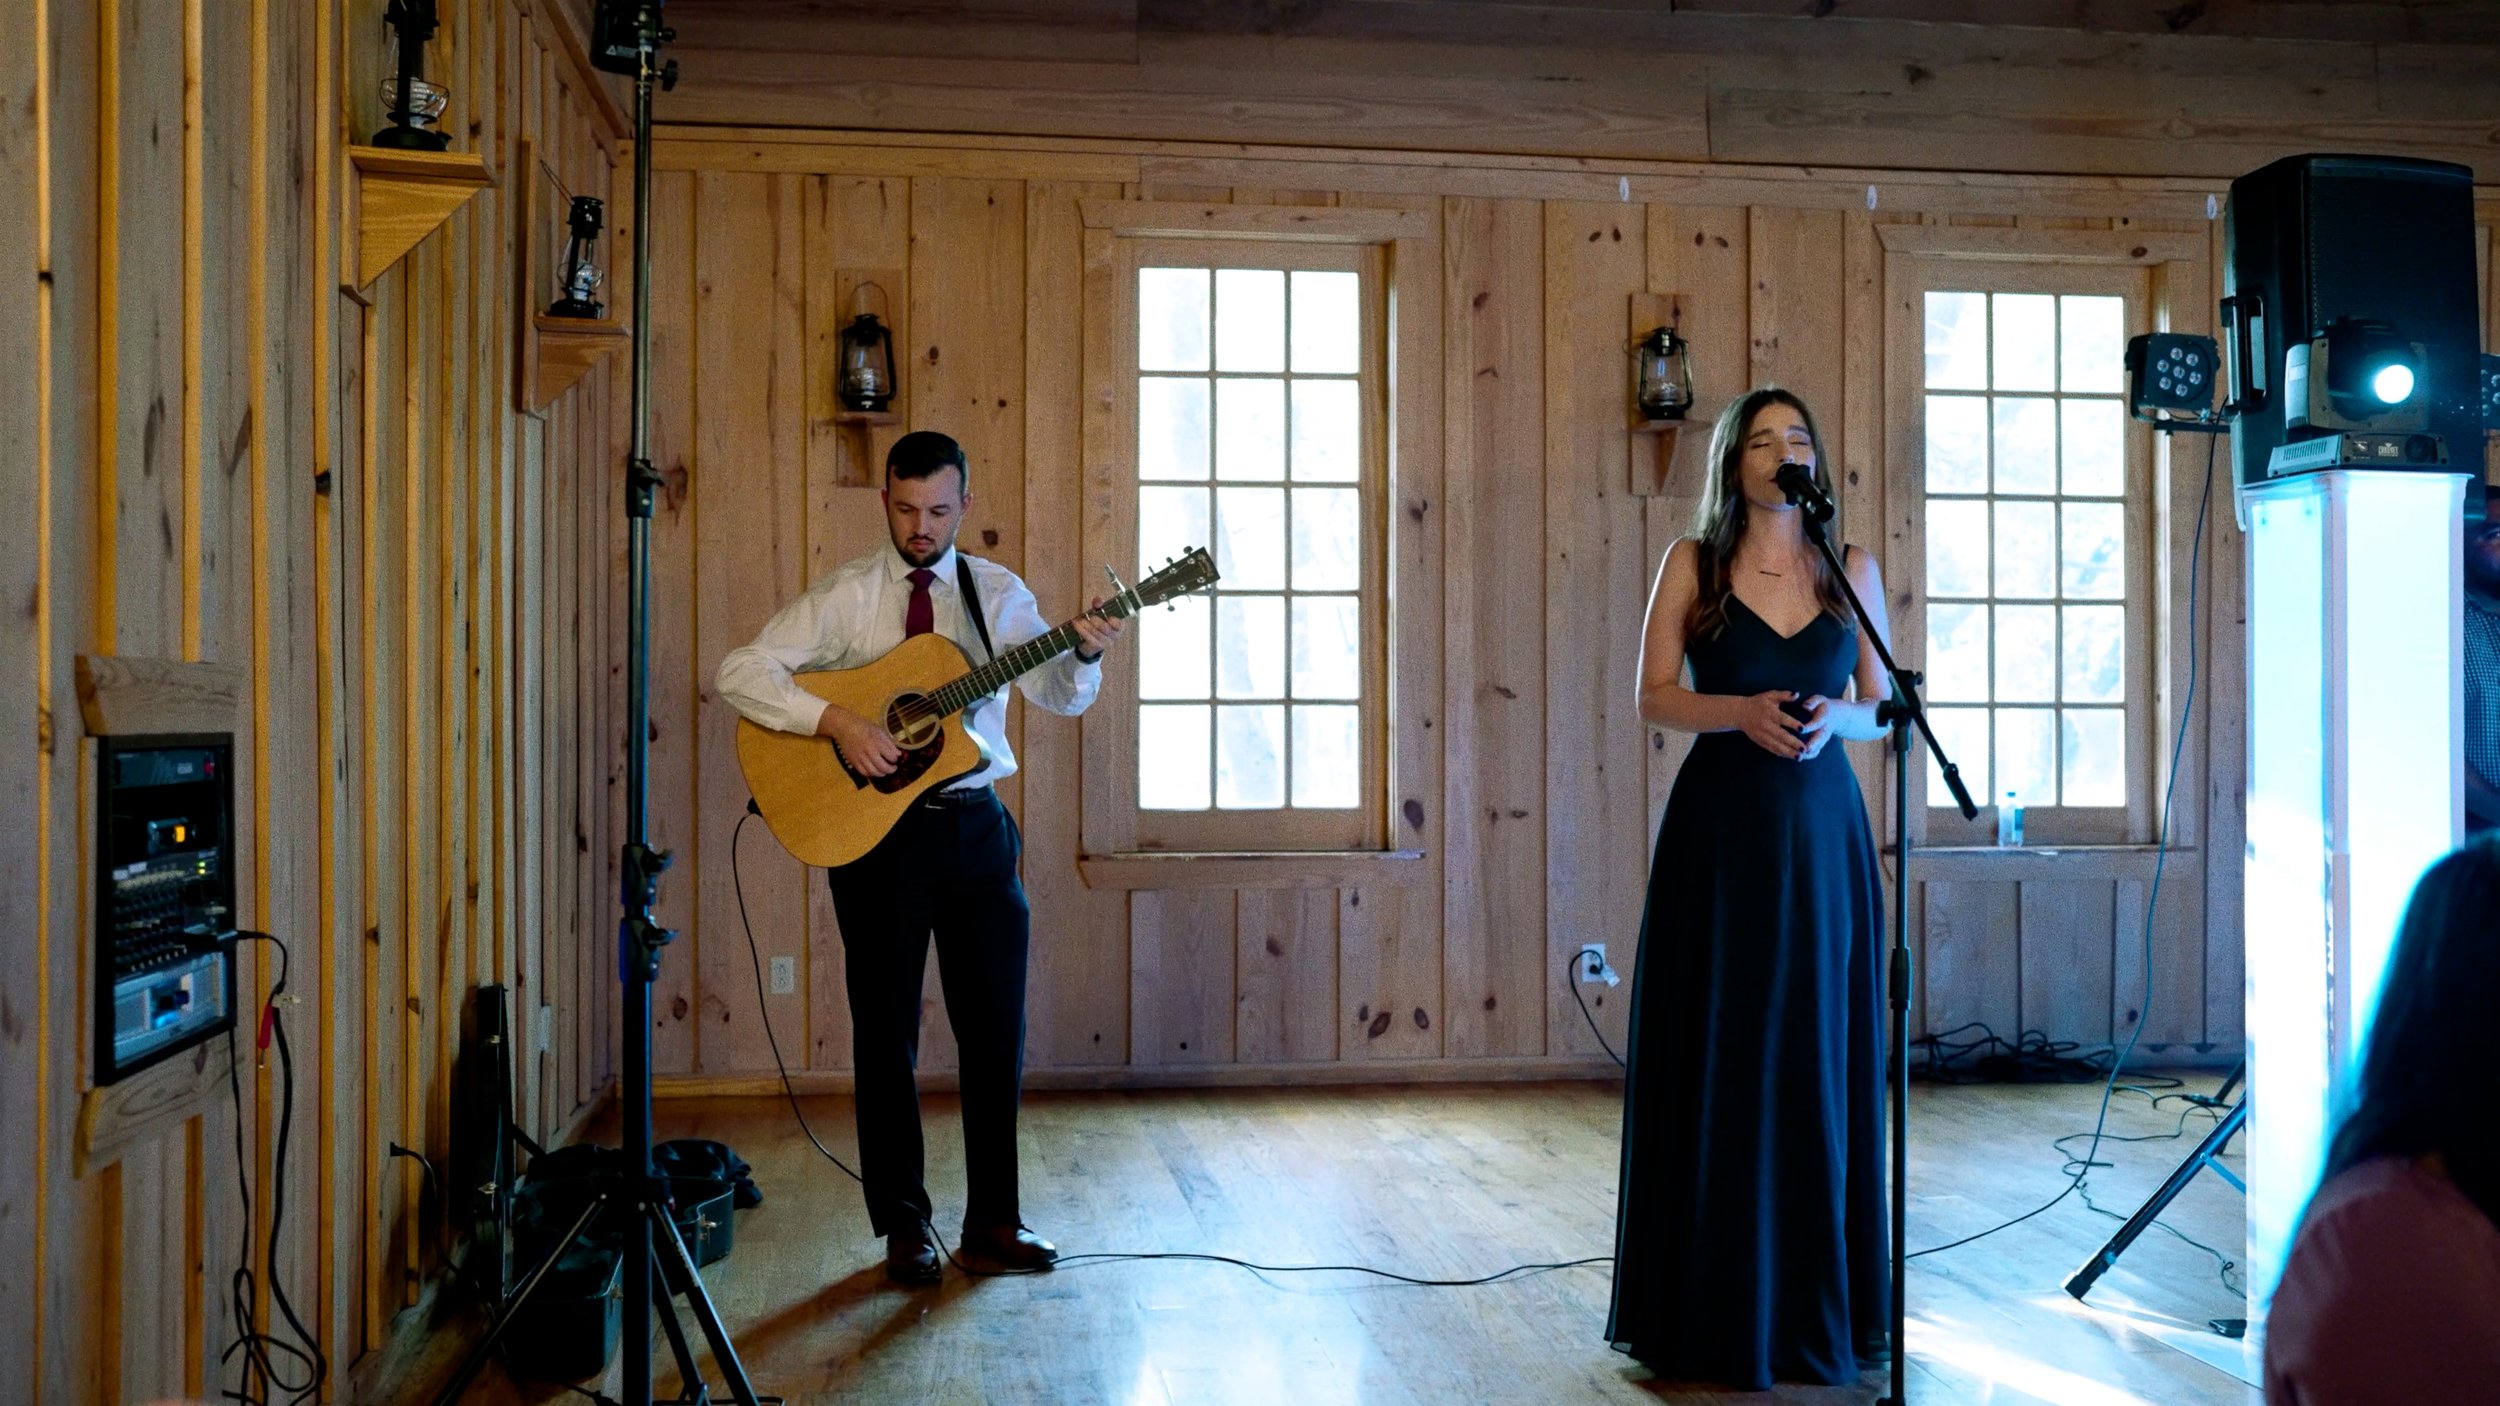 maid of honor sings first dance song for bride and groom on stage